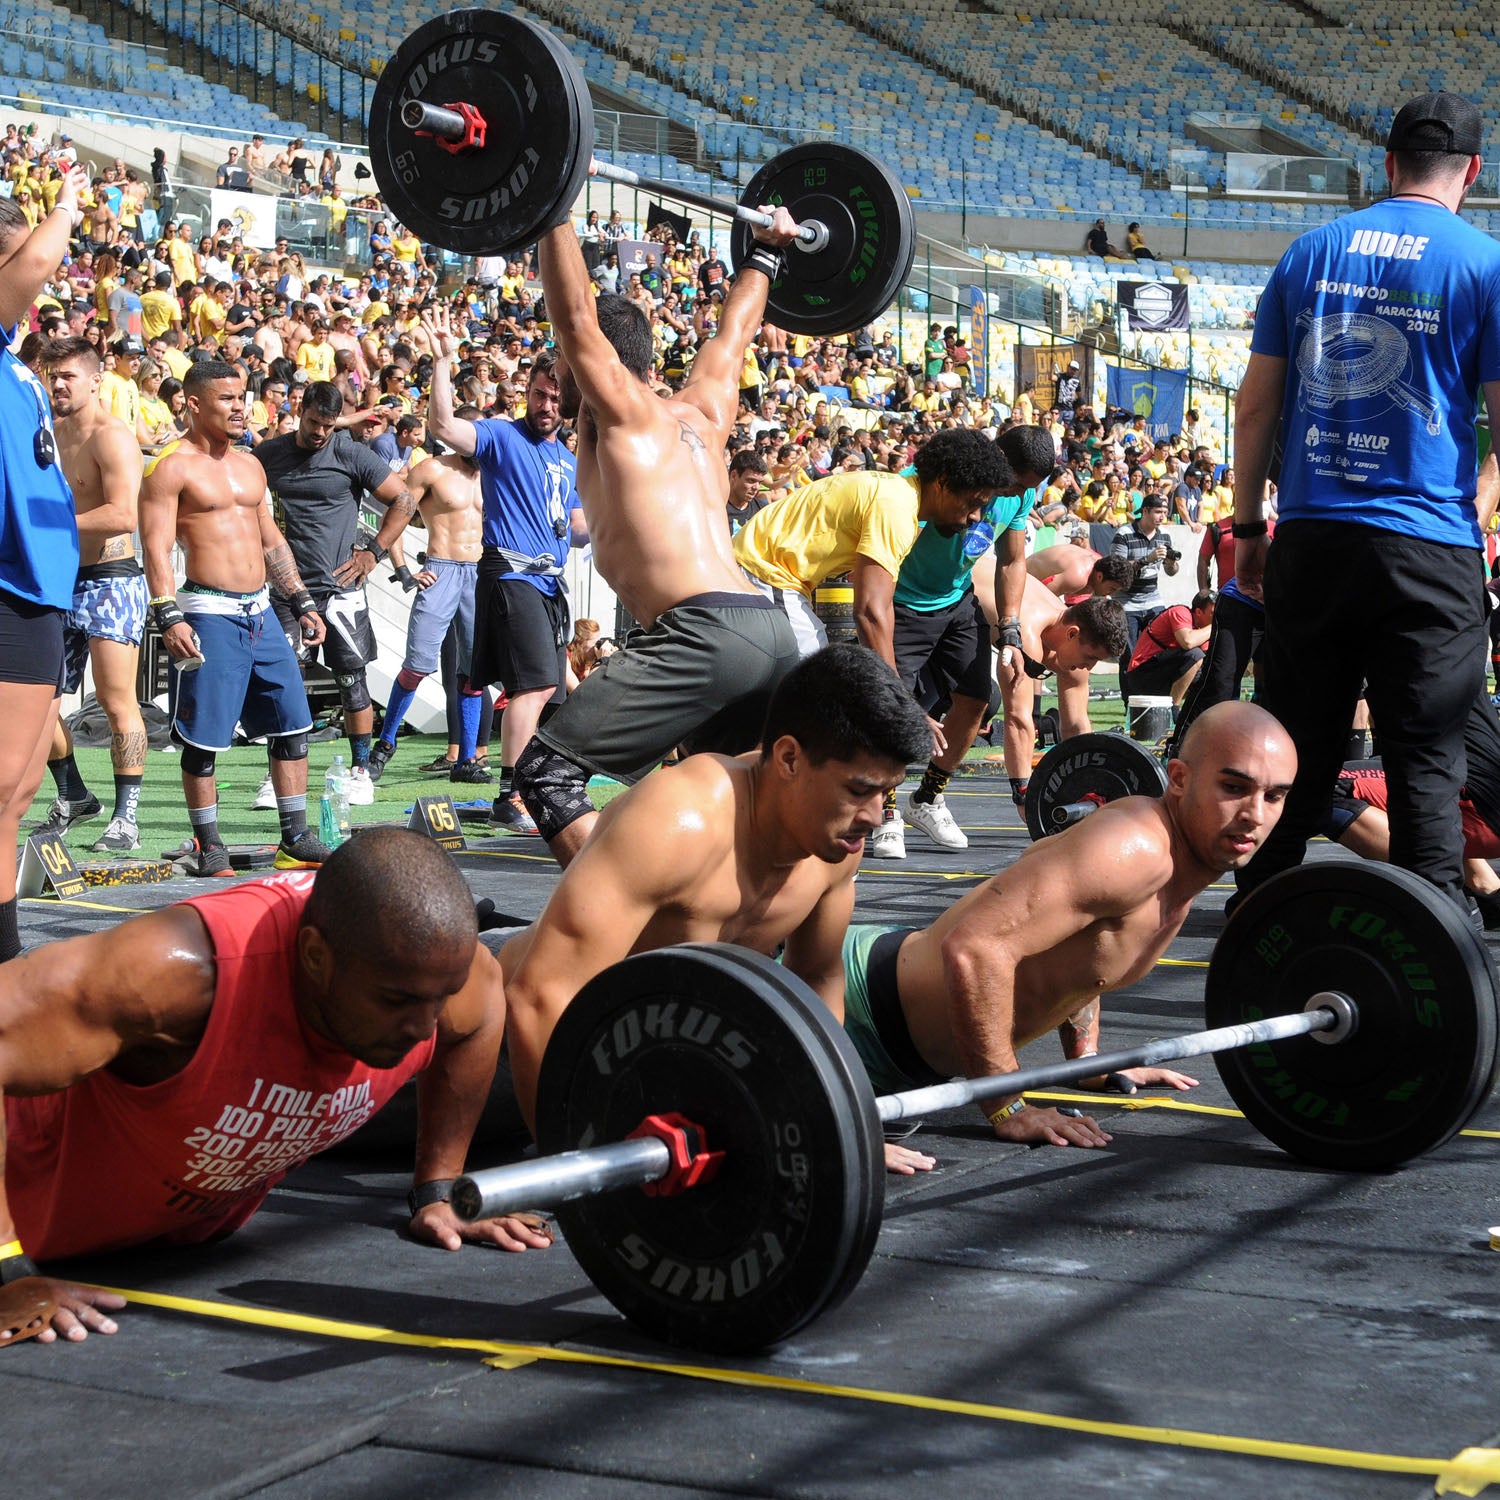 How To Qualify For The 2021 CrossFit Games Built for Athletes™